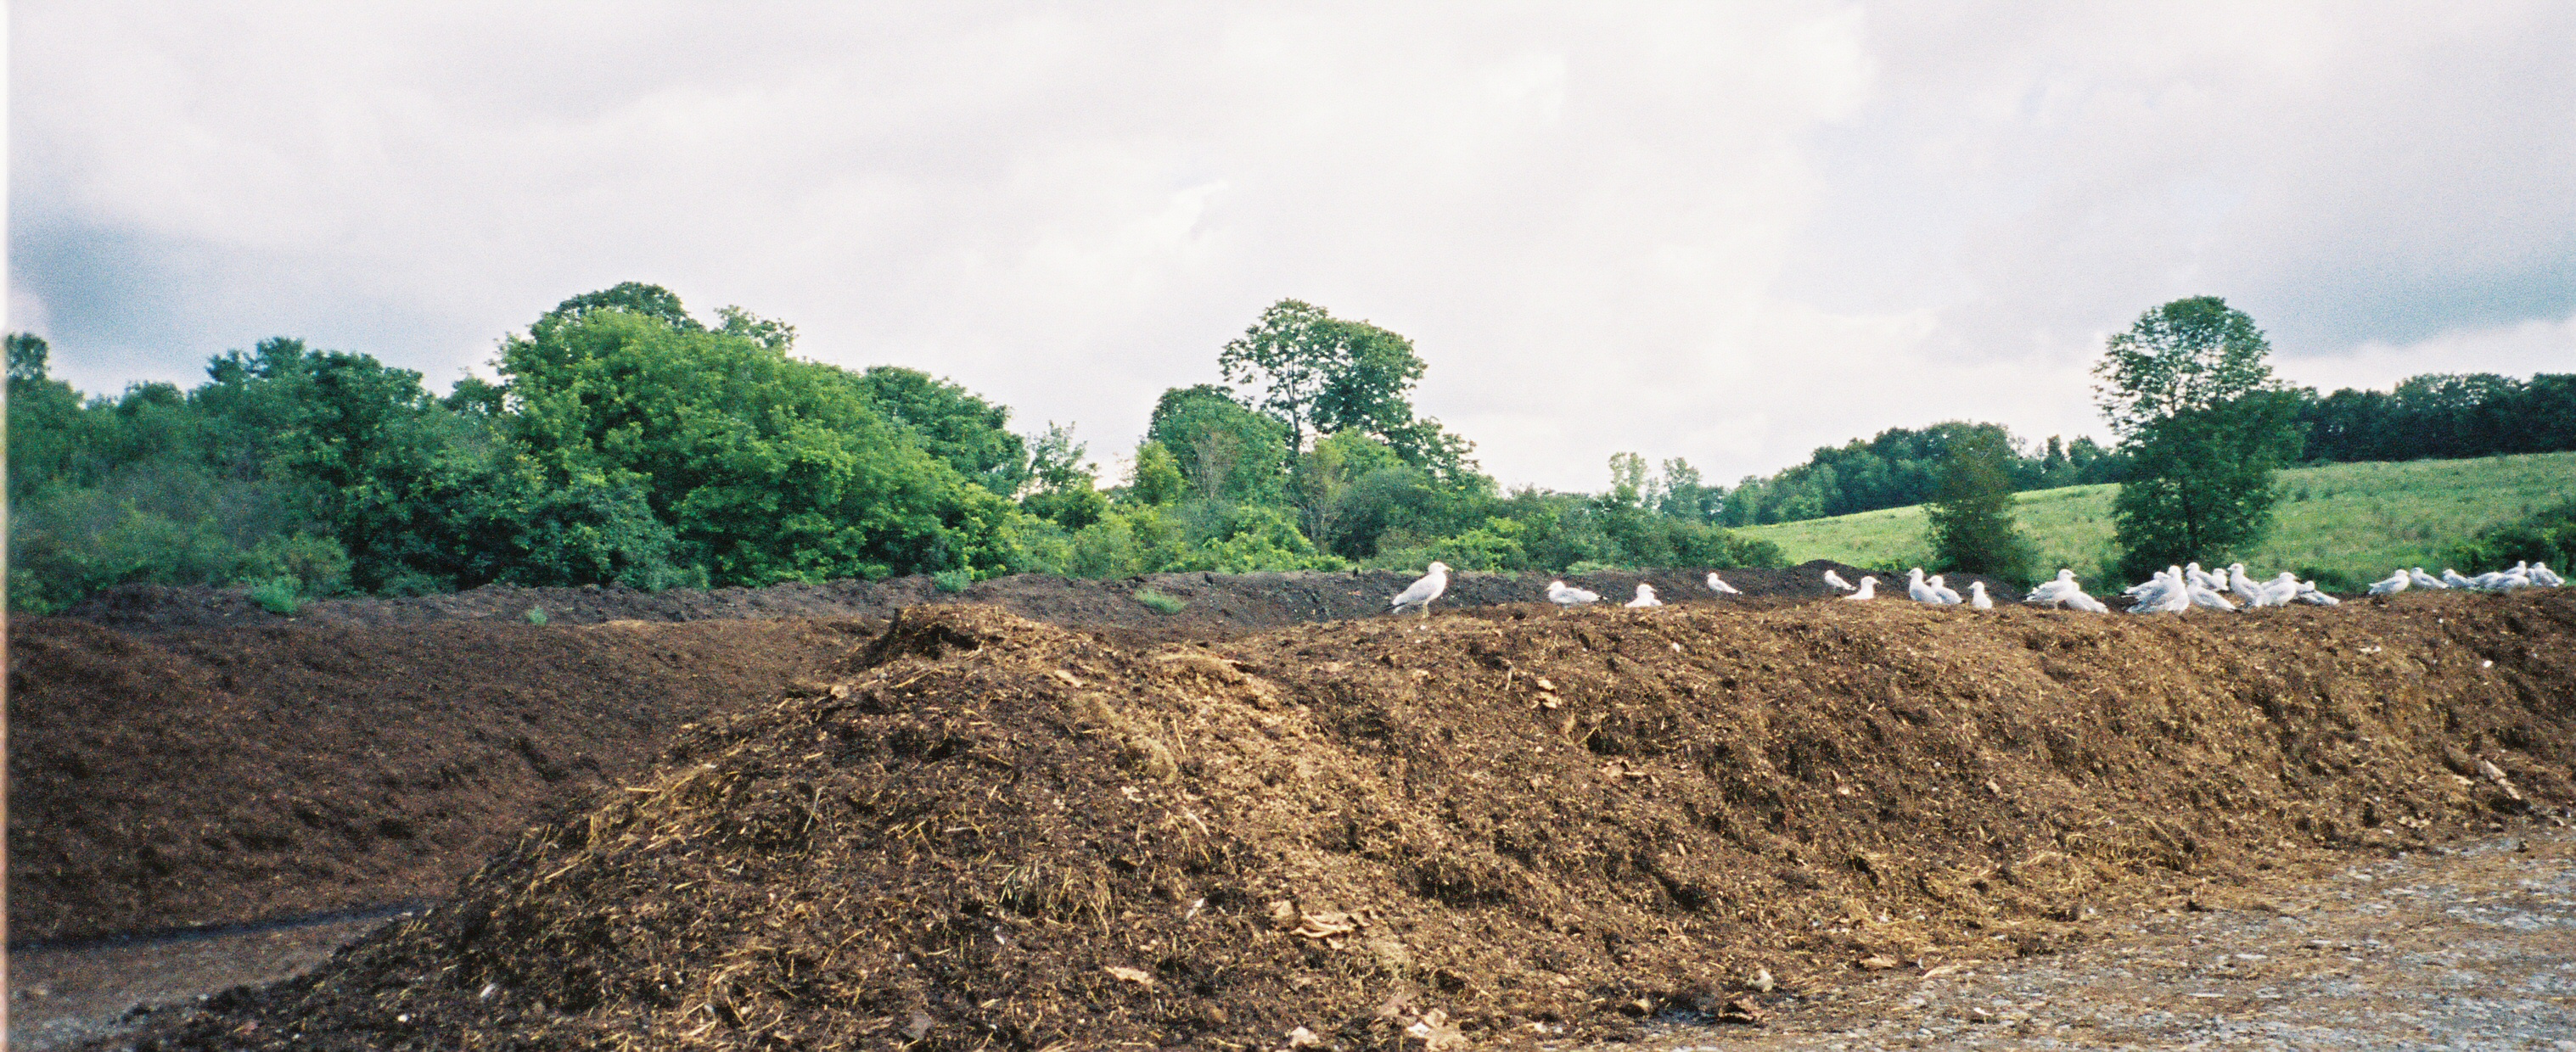 Piles of compost with birds